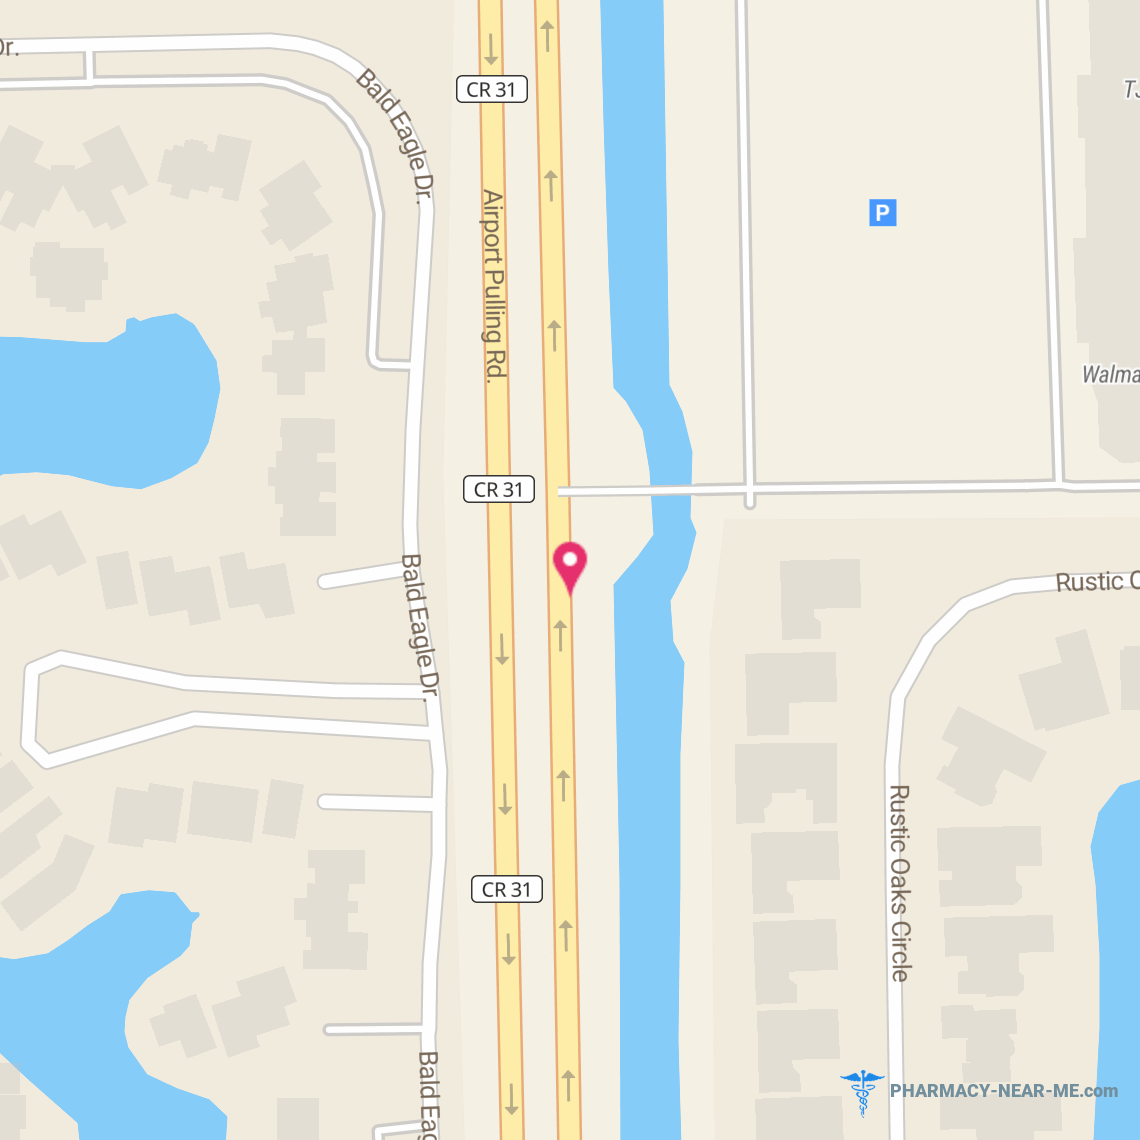 WALMART PHARMACY 10-4354 - Pharmacy Hours, Phone, Reviews & Information: 5010 Airport Pulling Road, Naples, Florida 34105, United States